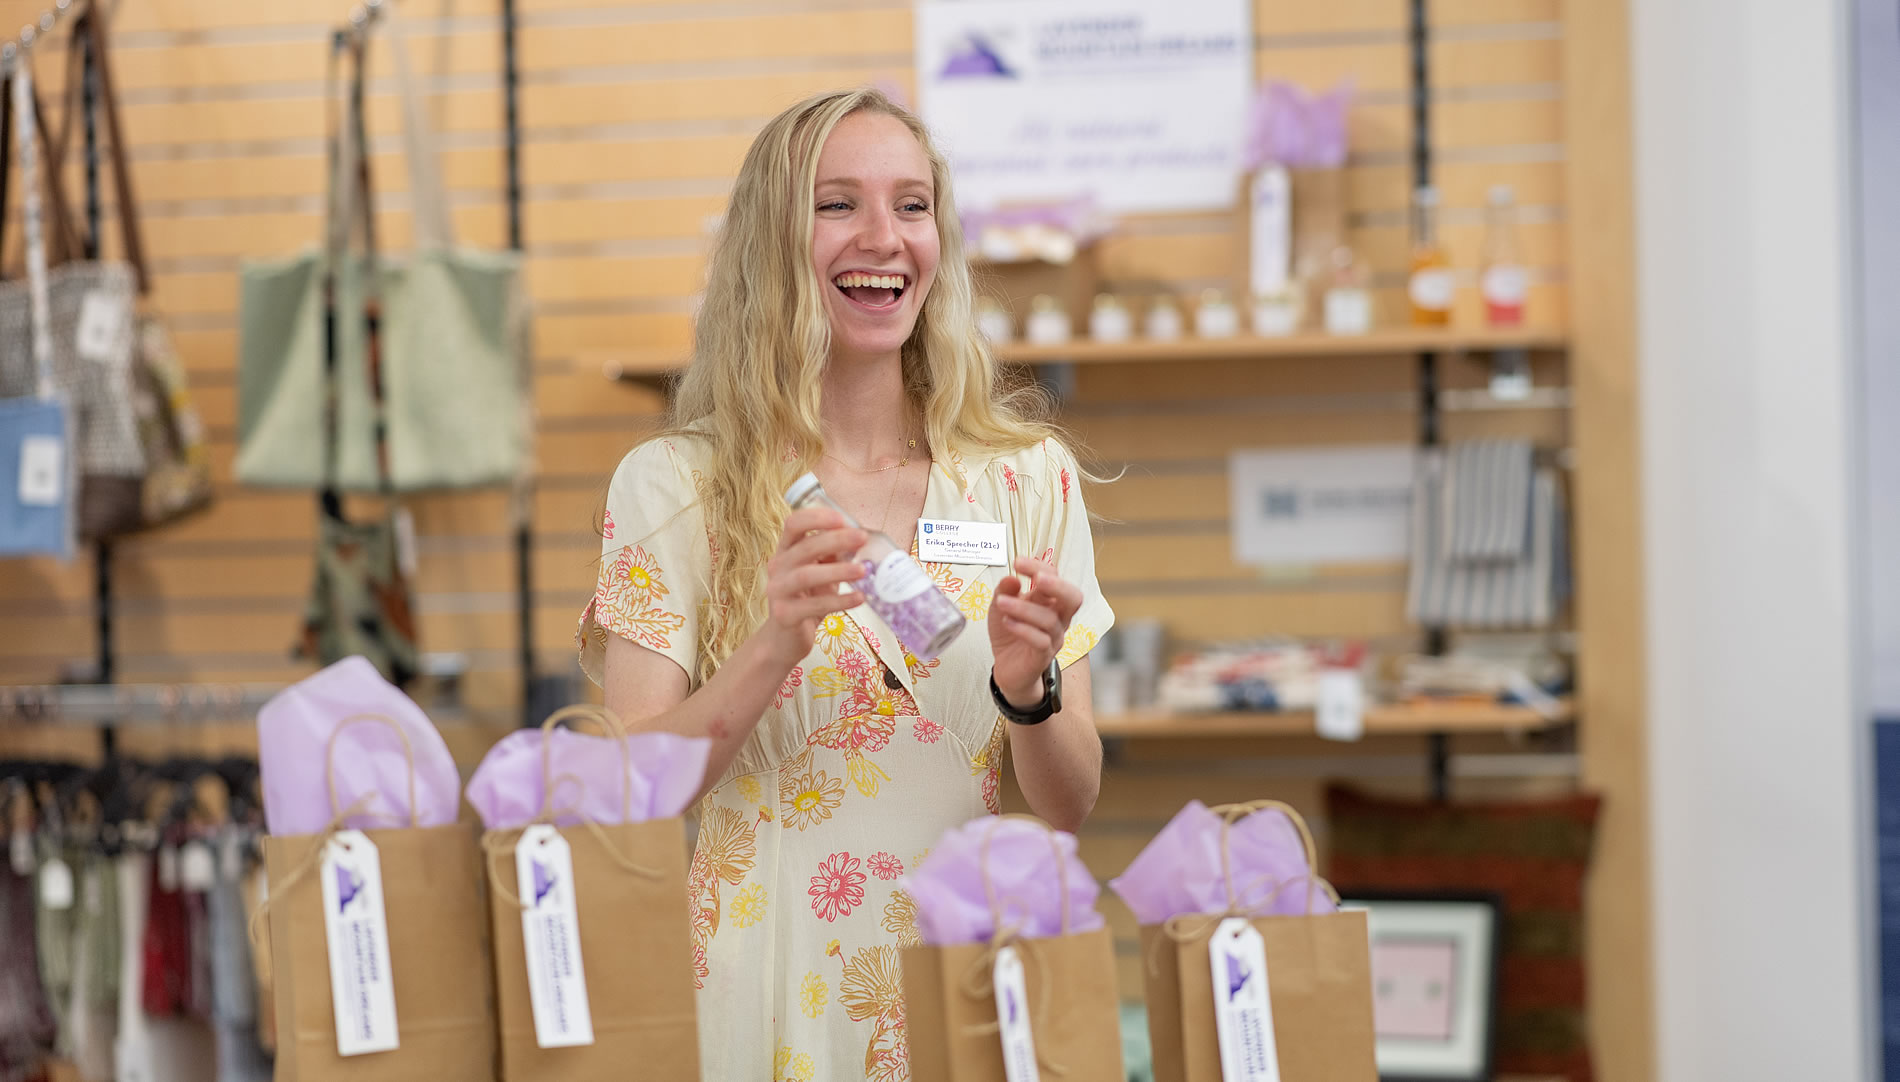             BERRY GRAD PURSUES ENTREPRENEURIAL DREAMS WHILE WORKING FULL-TIME     